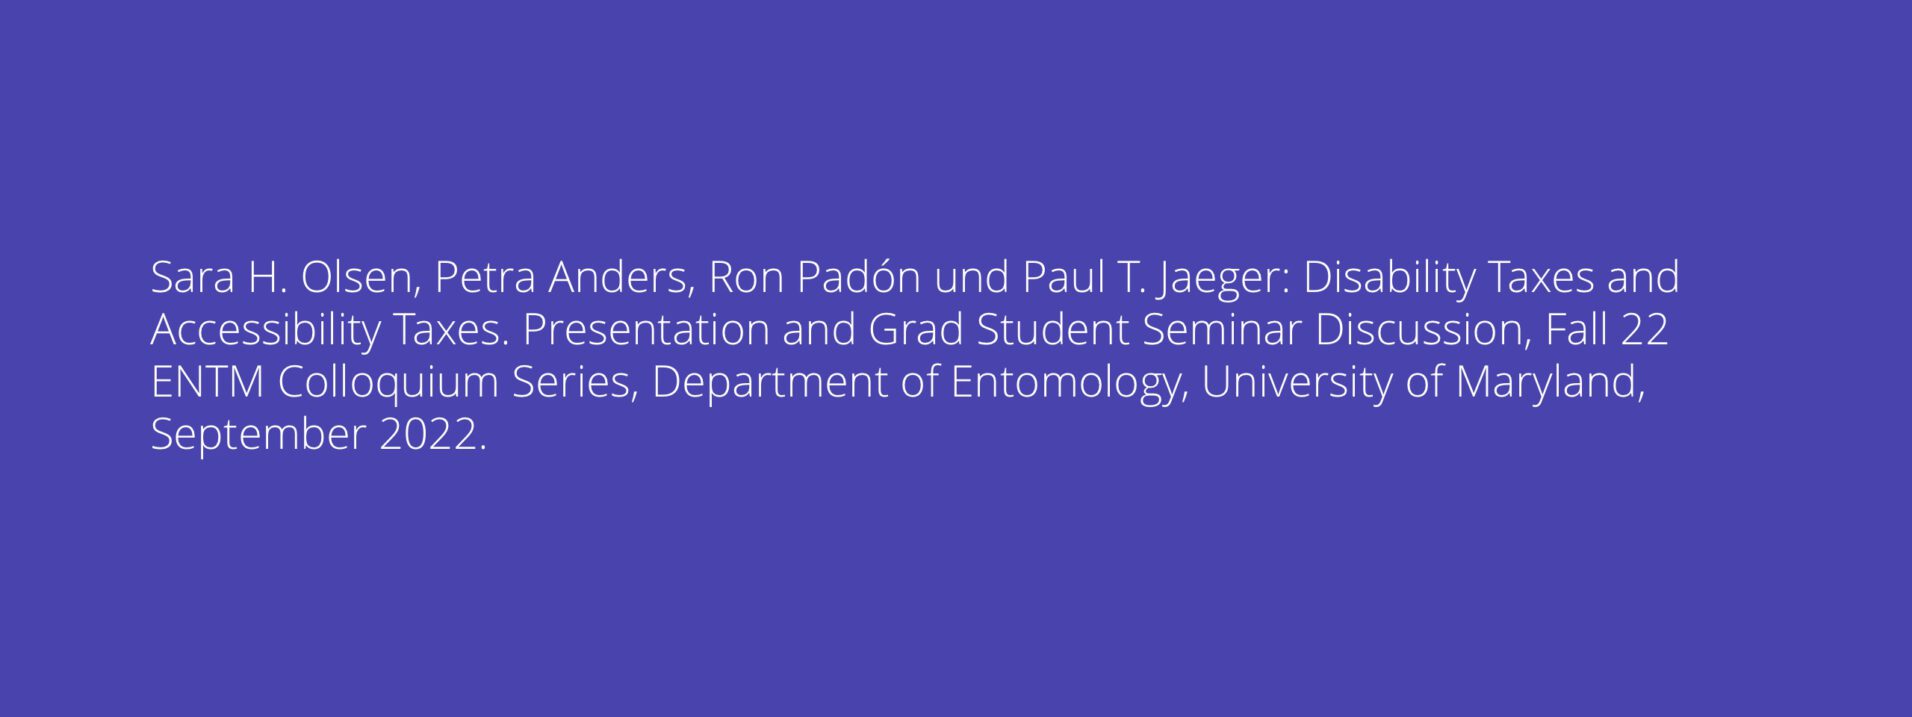 Sara H. Olsen, Petra Anders, Ron Padón und Paul T. Jaeger: Disability Taxes and Accessibility Taxes. Presentation and Grad Student Seminar Discussion, Fall 22 ENTM Colloquium Series, Department of Entomology, University of Maryland, September 2022.